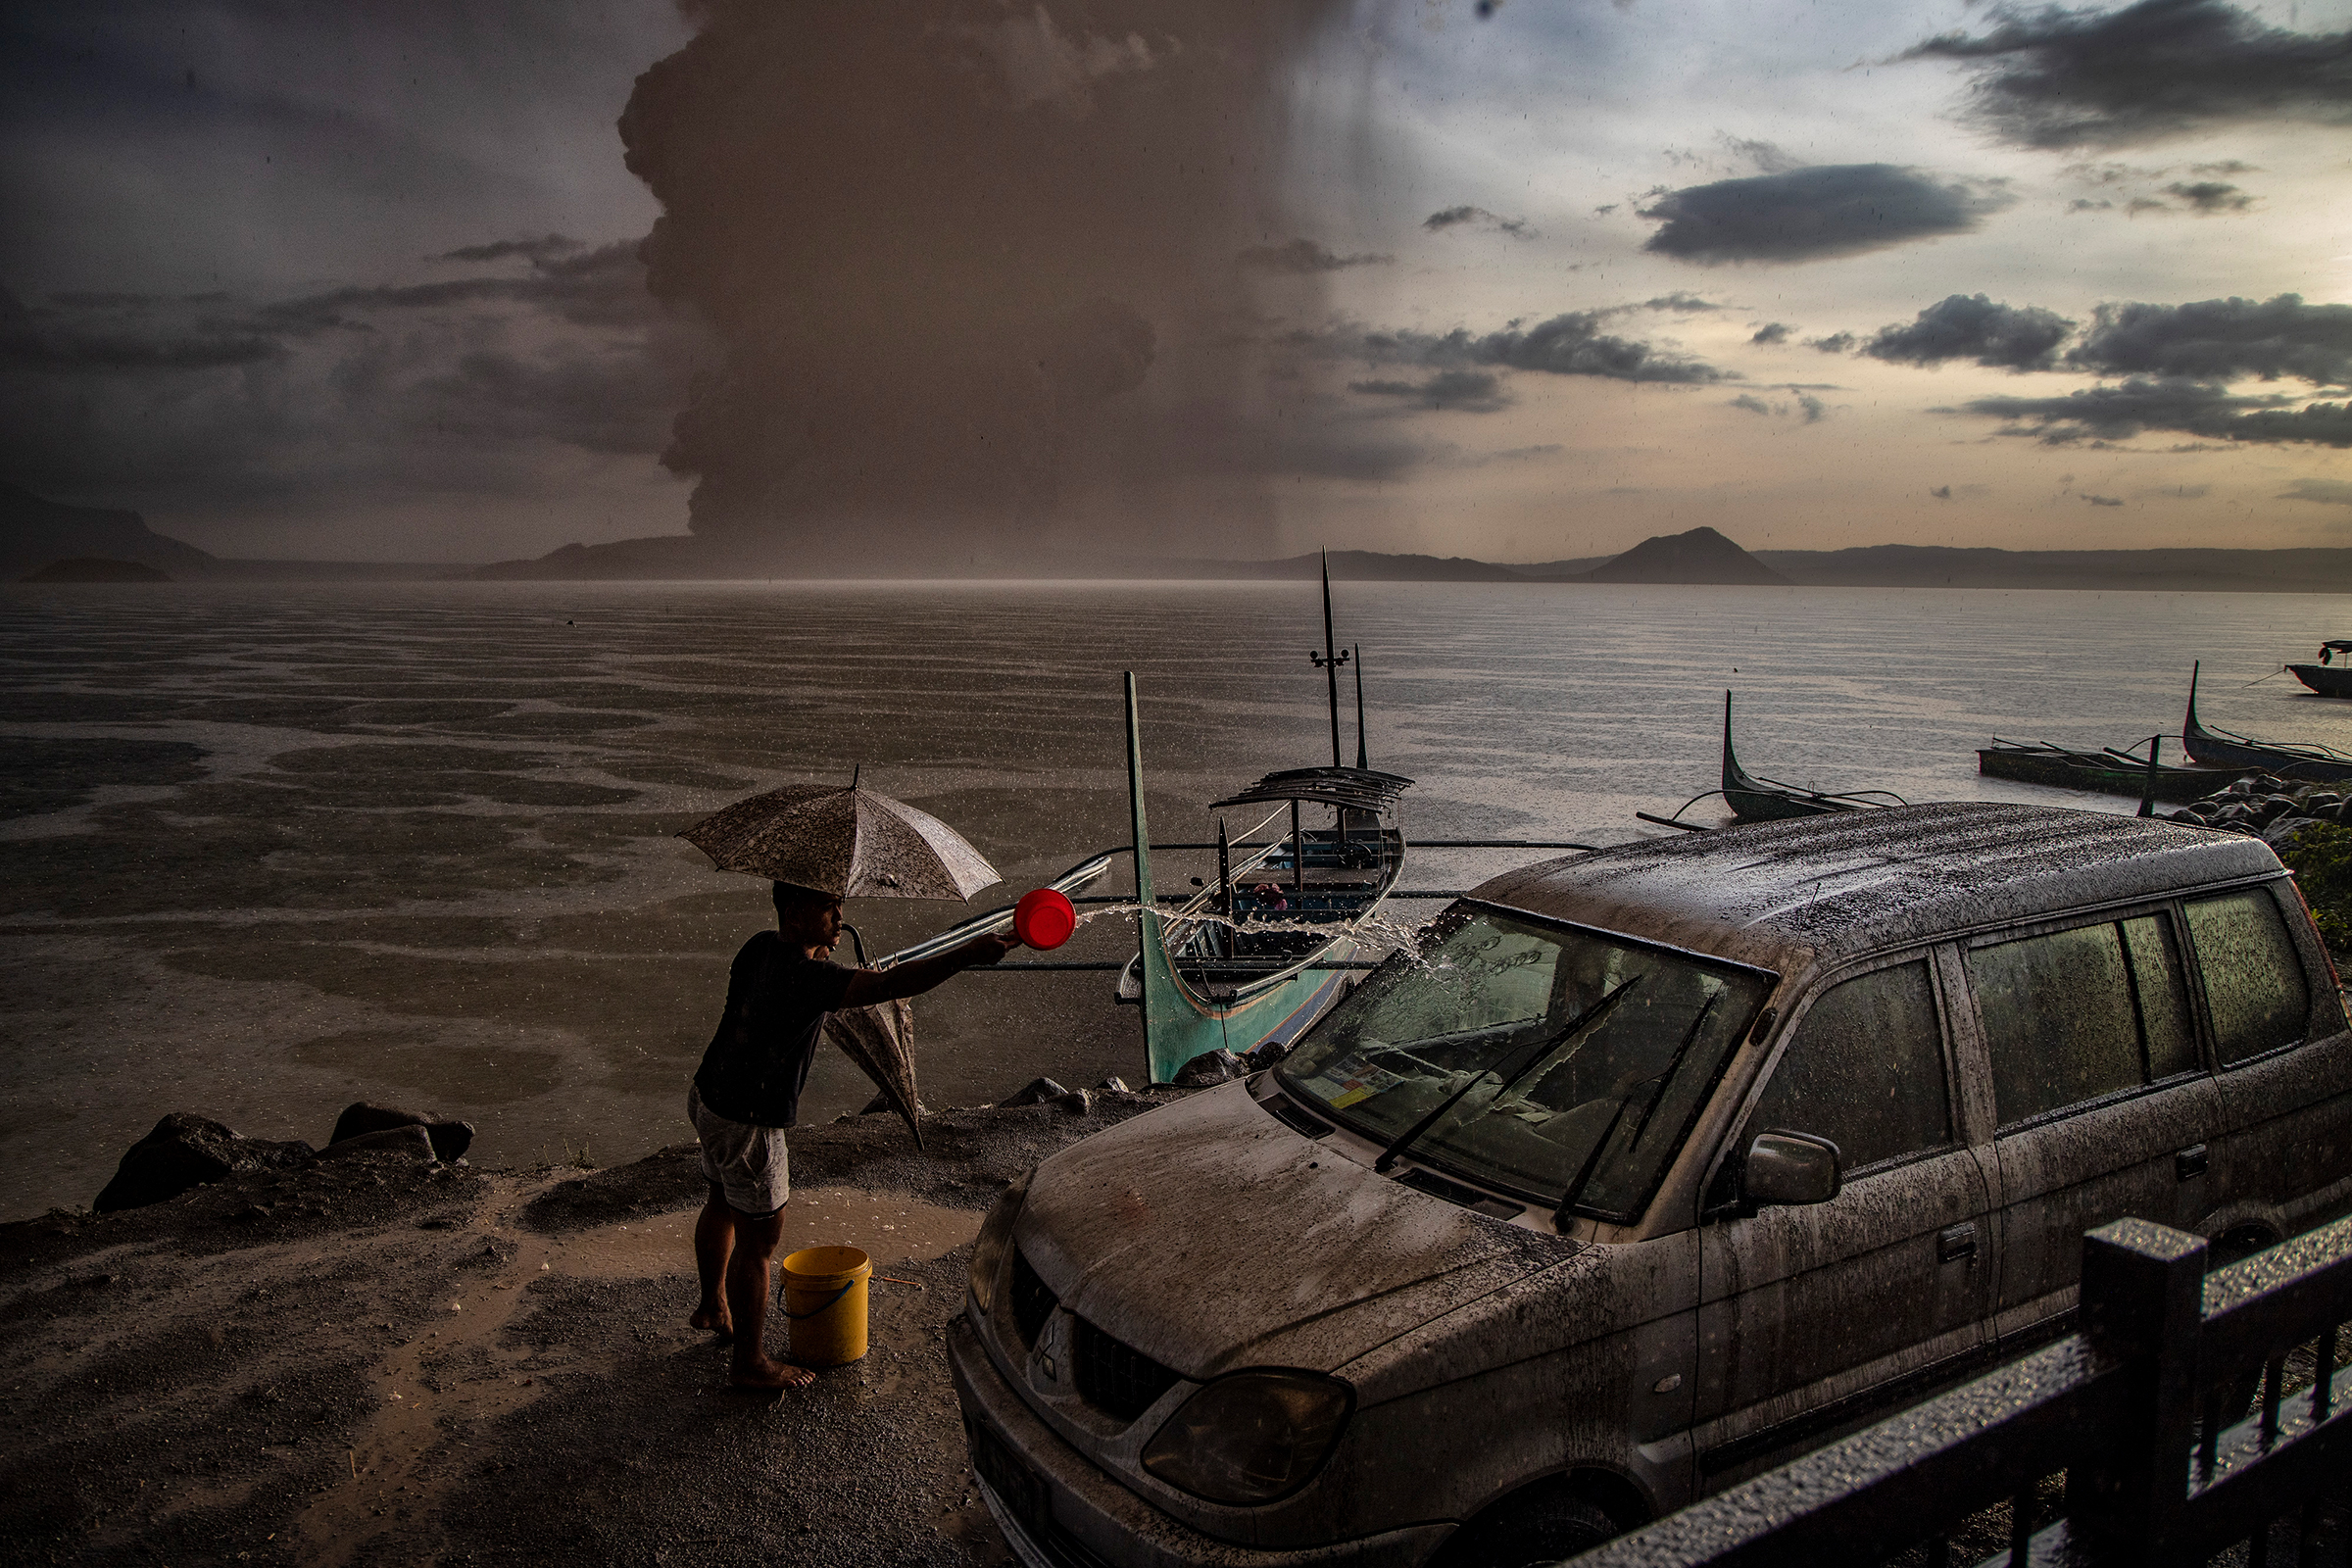 A resident in Talisay, in Batangas province, splashes water on a vehicle covered in ash mixed with rainwater as the Taal Volcano erupts on Jan. 12. (Ezra Acayan—Getty Images)